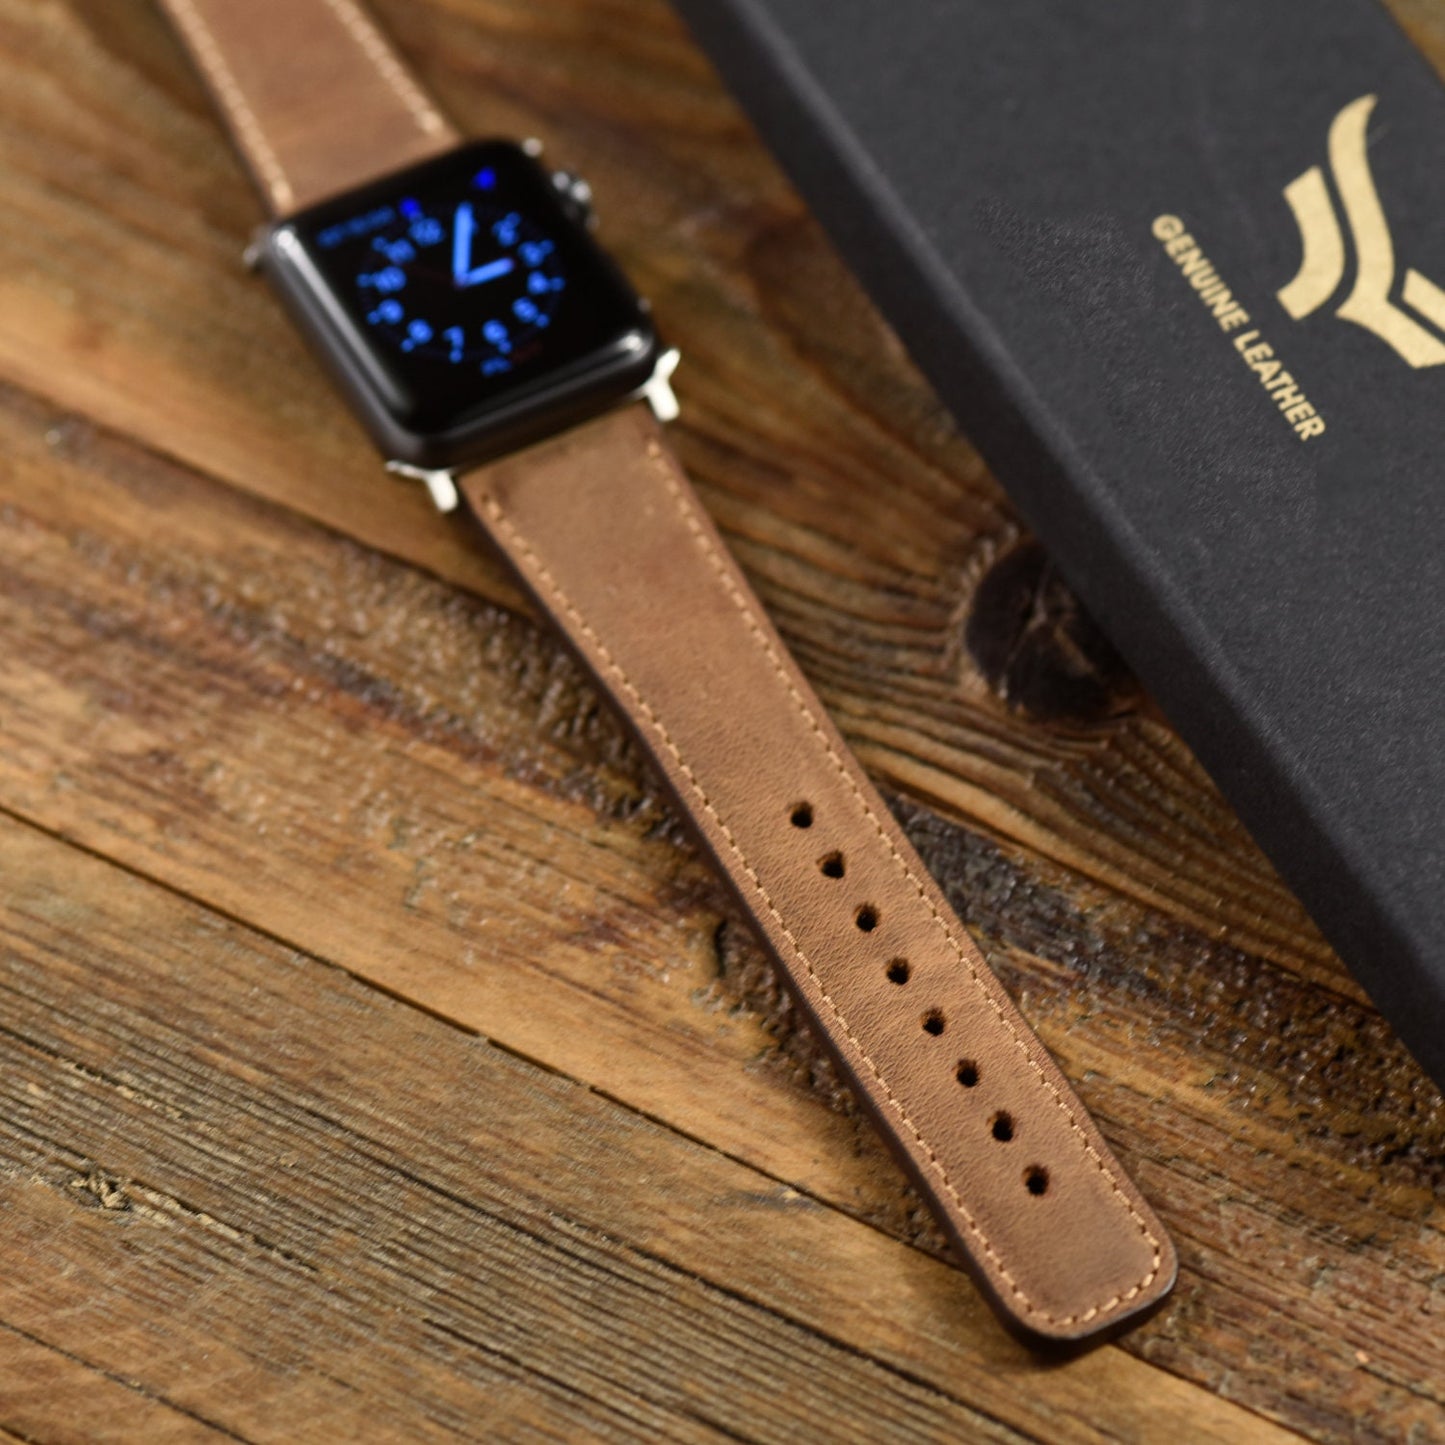 ANNIVERSARY Gift for Boy Friend Premium Leather Brown Apple Watch Band 38mm, 42mm, 44mm, 40mm for Series 7-6-5-4-3-2-1 and SE